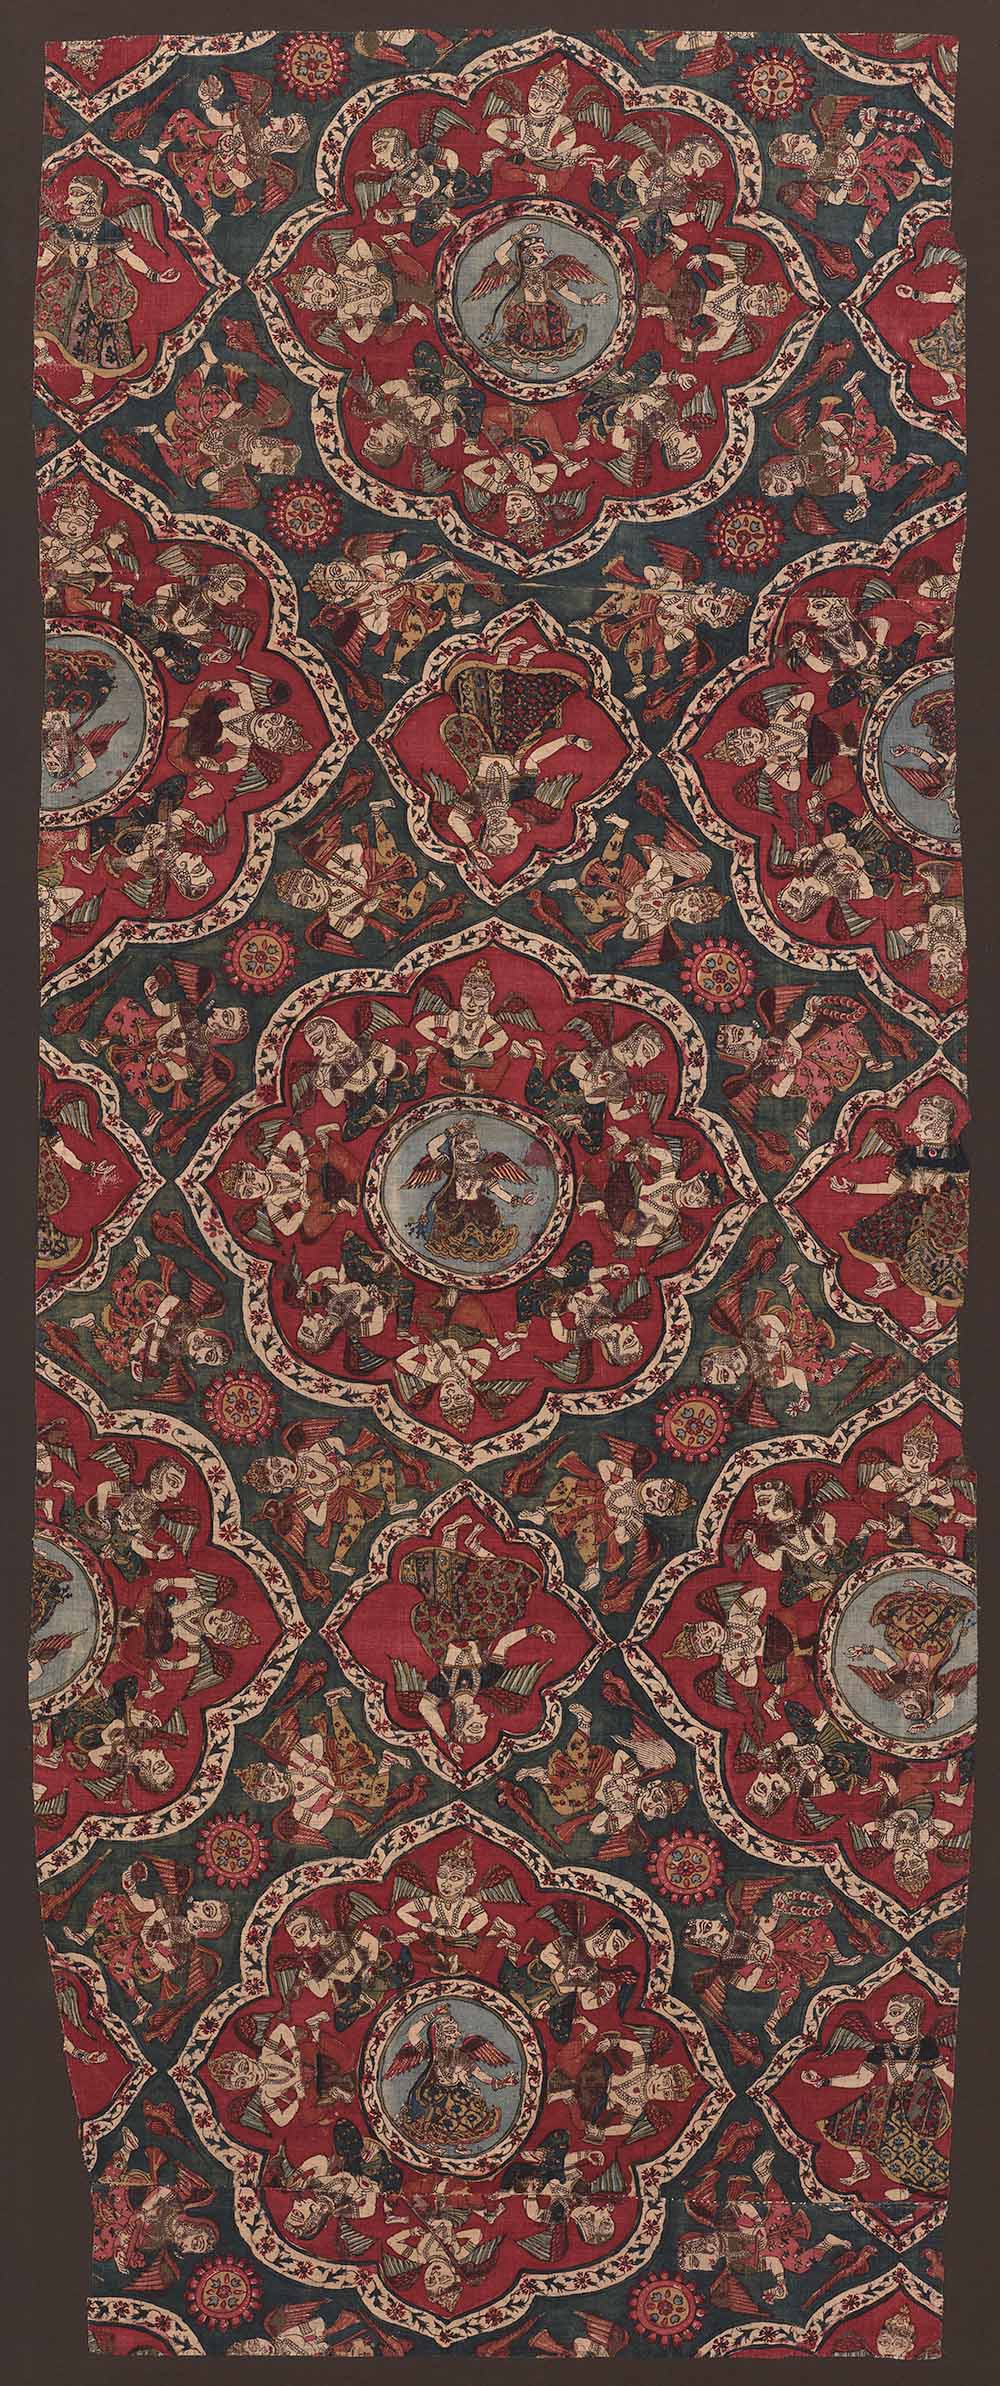 Fragment of a Canopy with Celestial Dancers and Musicians, circa 1800-1830, India; Andhra Pradesh, cotton, mordant, and resist-dyed, with painting, Asian Art Museum of San Francisco, Museum Purchase with additional funds from Betty N. Alberts and Alexander Johnson, 2011.2